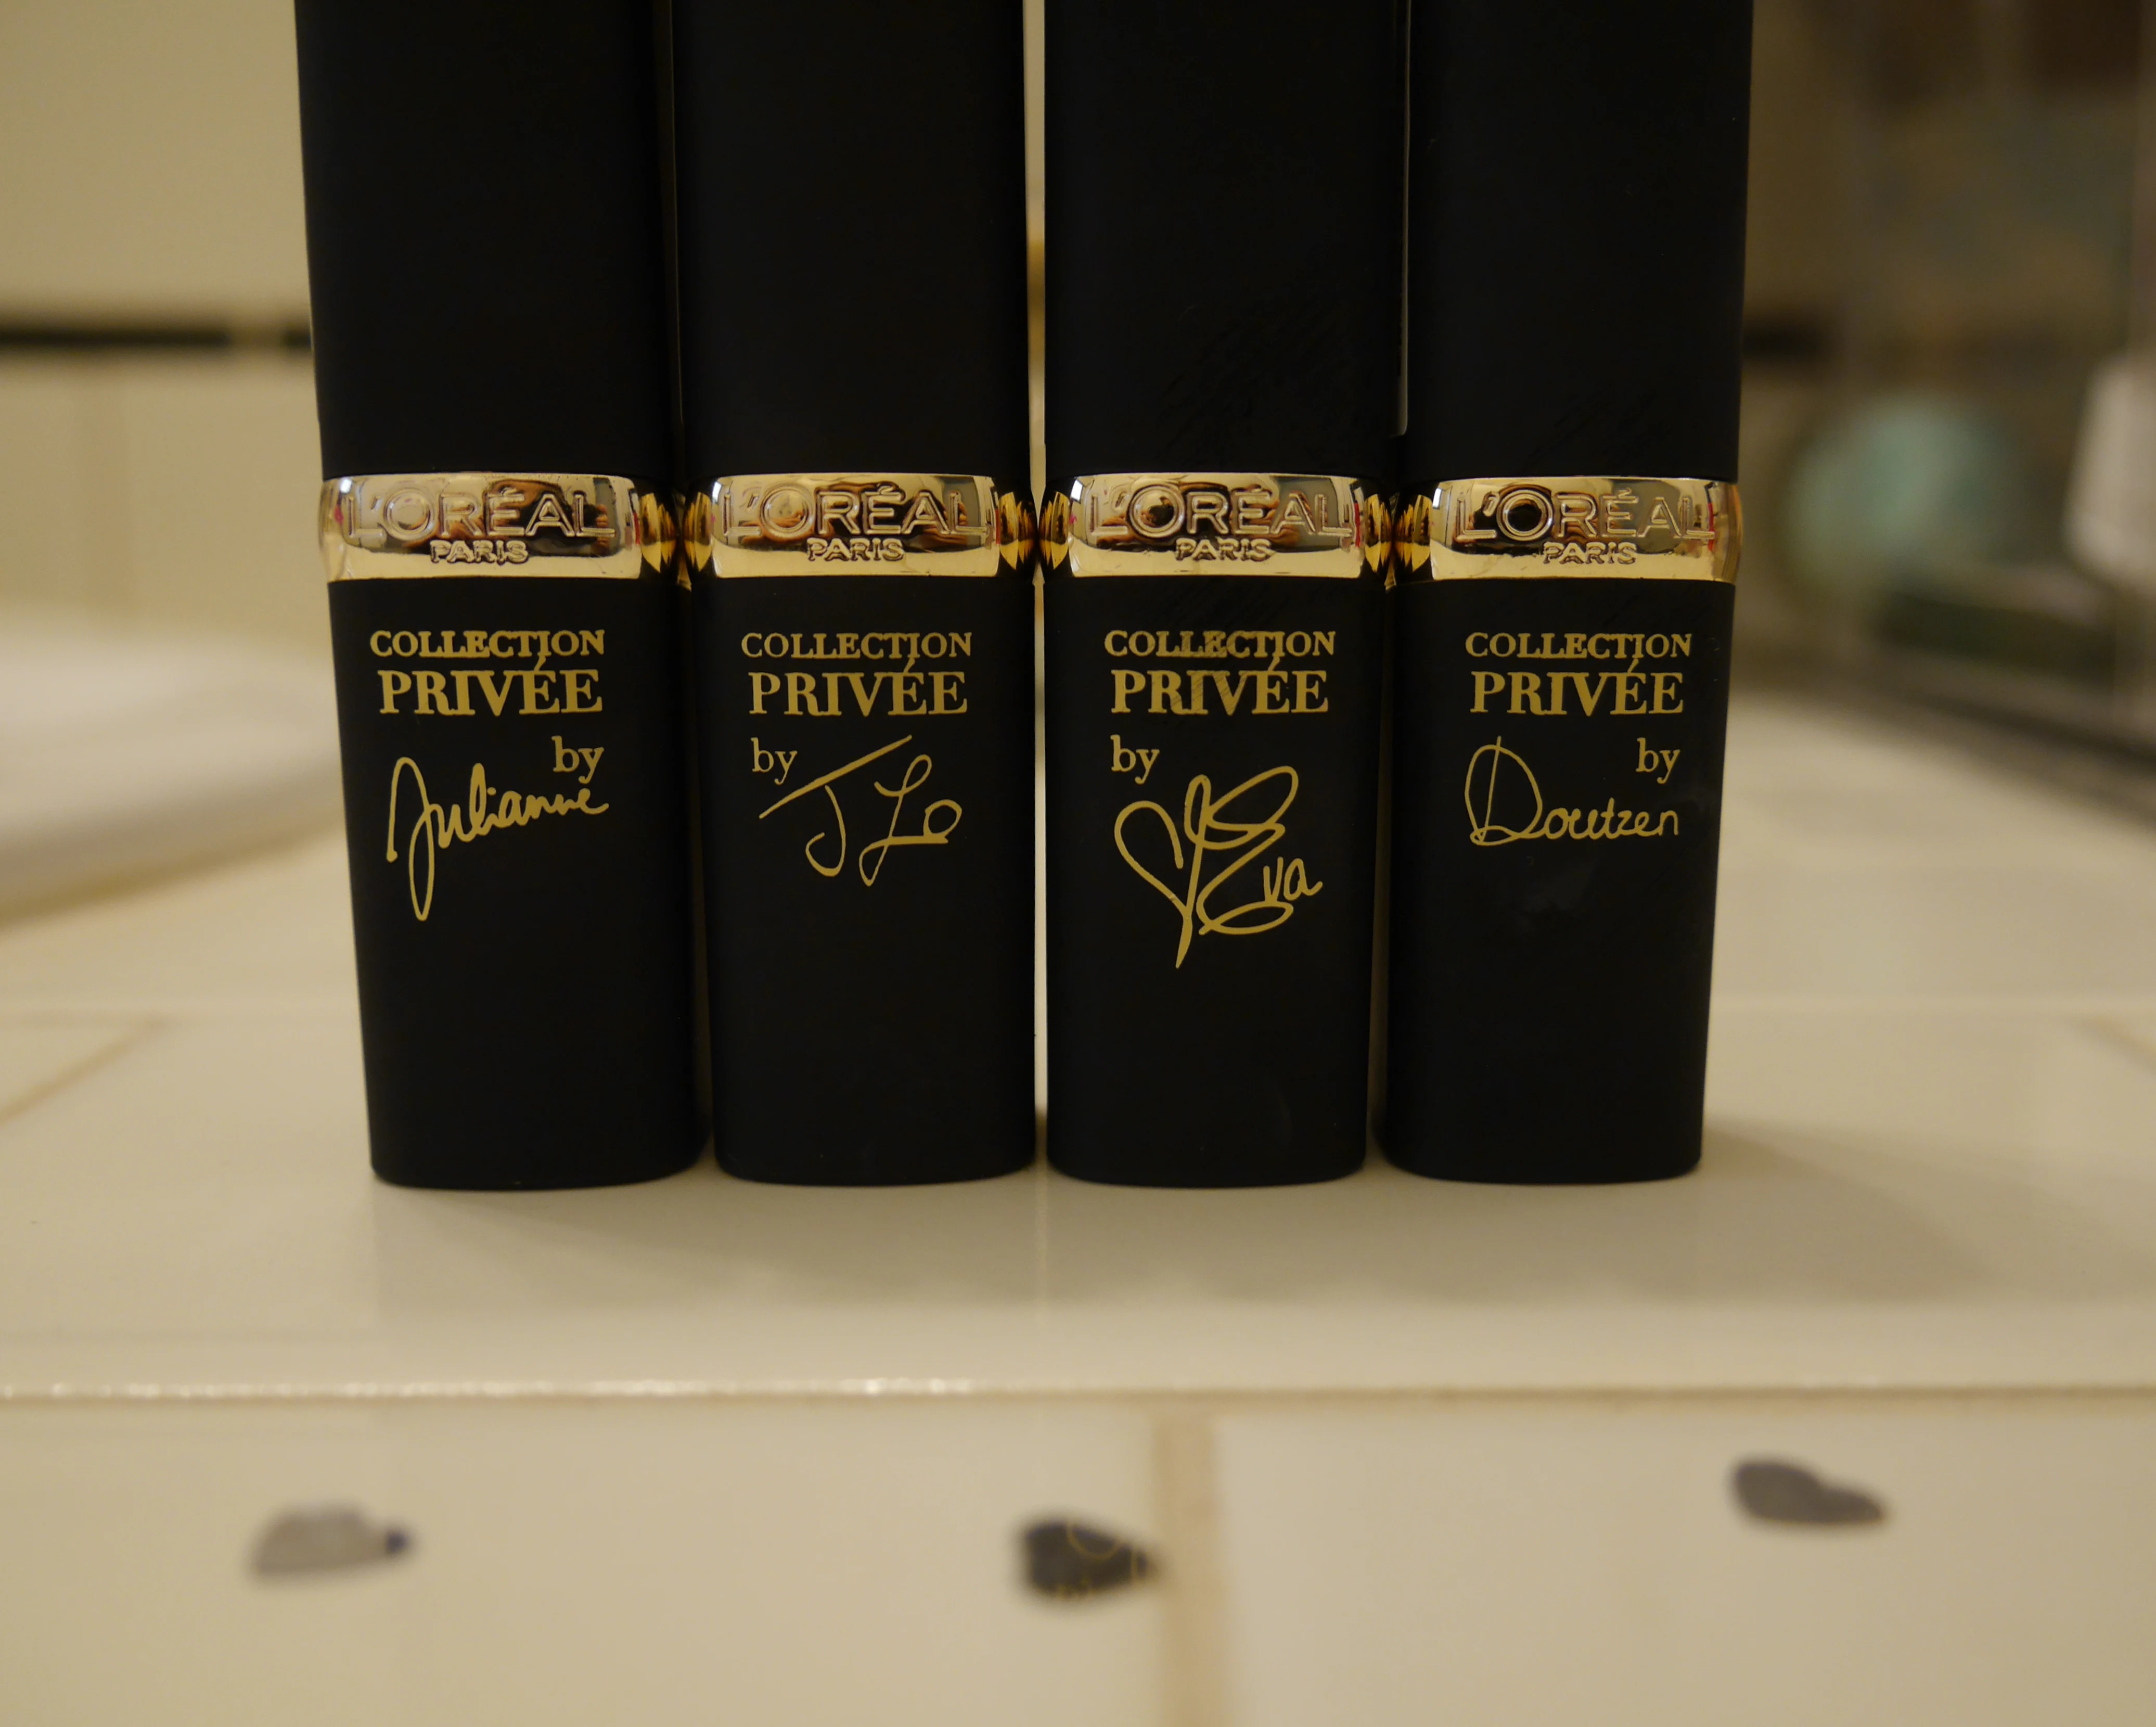 loreal-collection-privee-nude-lipsticks-nail-polish-review-swatches-2014.jpeg